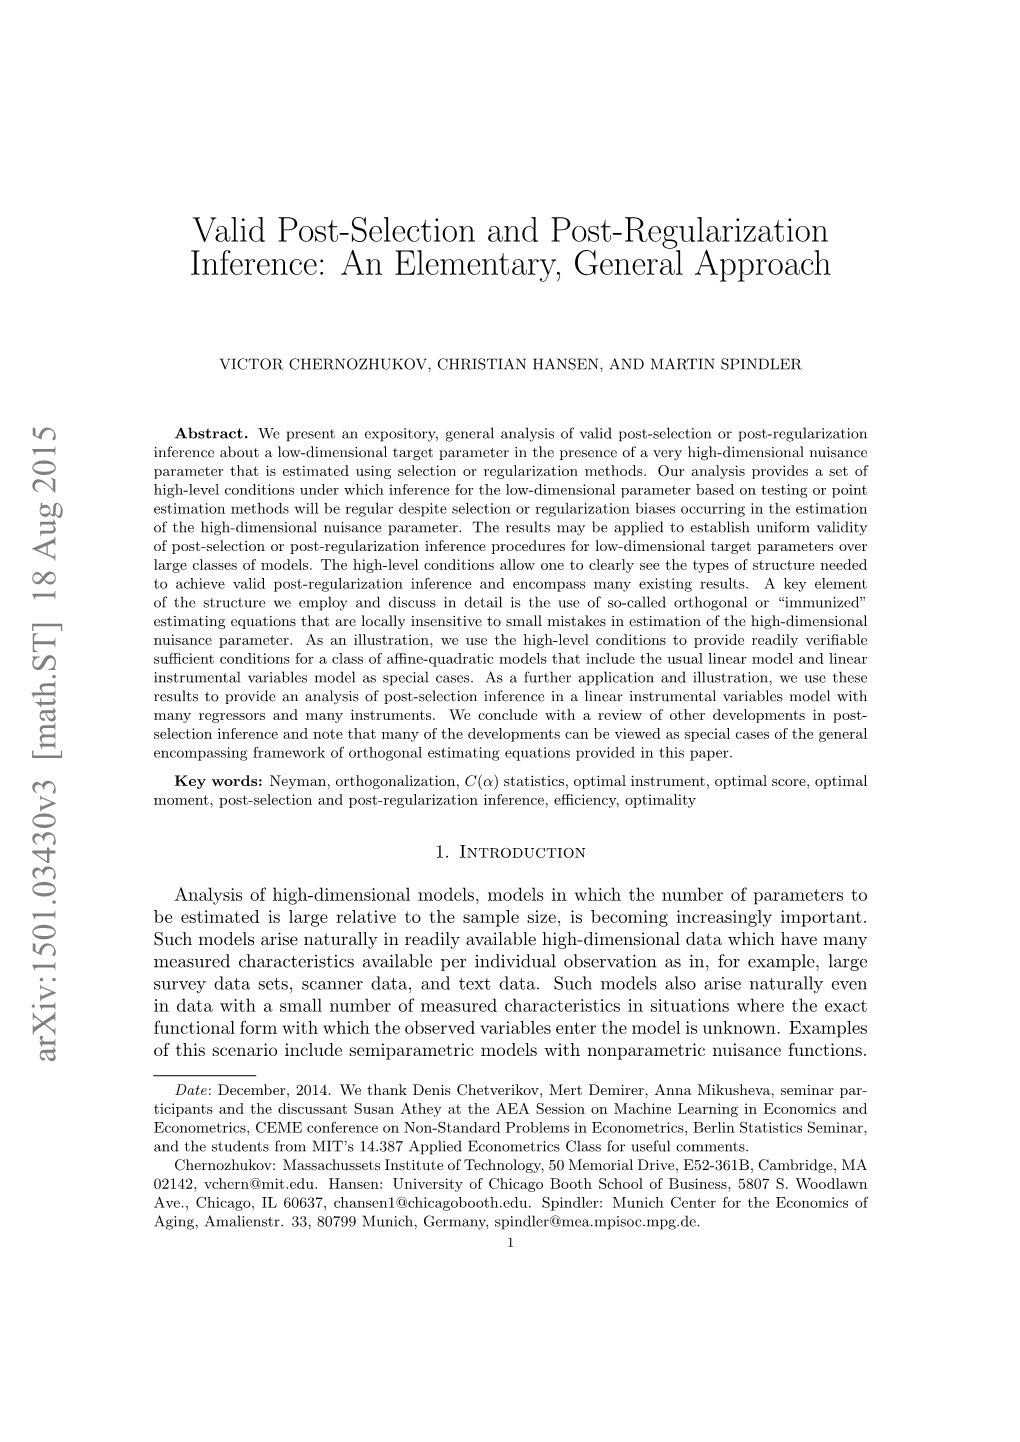 Valid Post-Selection and Post-Regularization Inference: an Elementary, General Approach